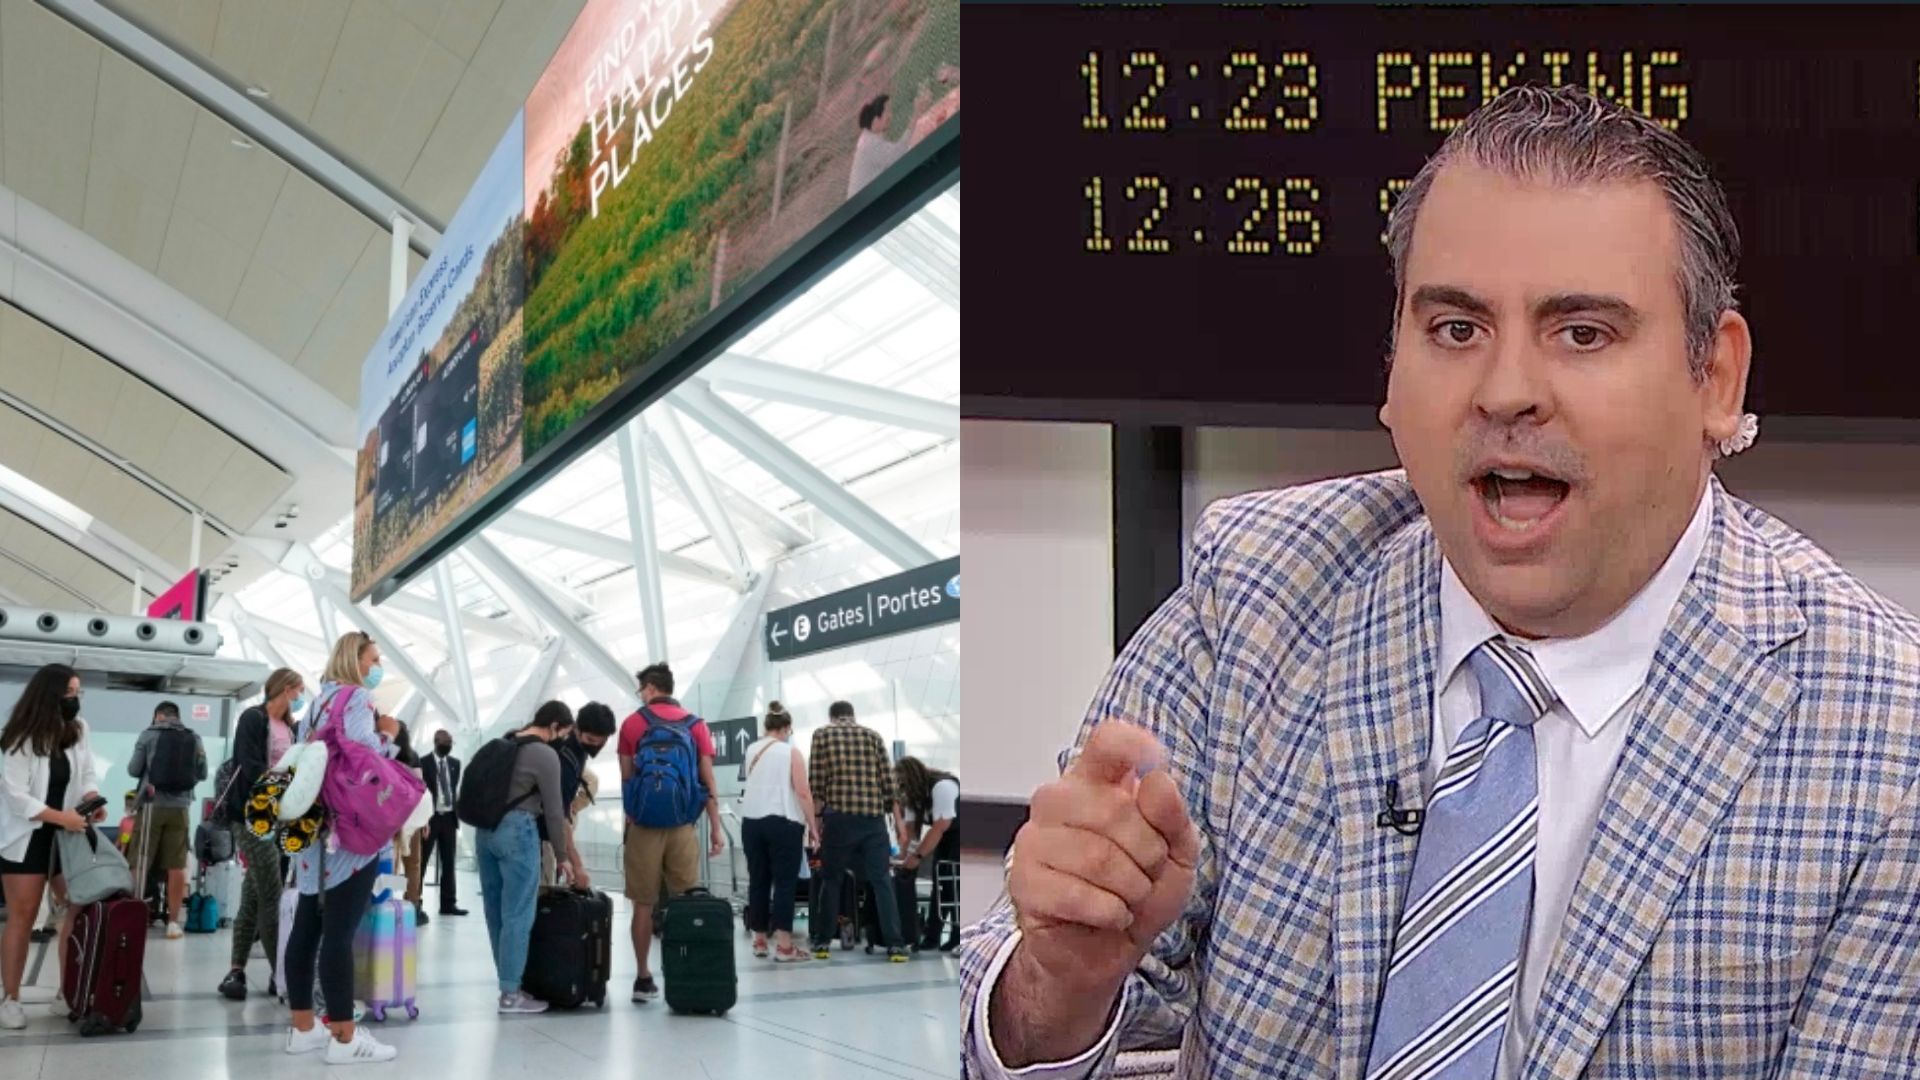 How early SHOULD you arrive to the airport? (We can't decide)